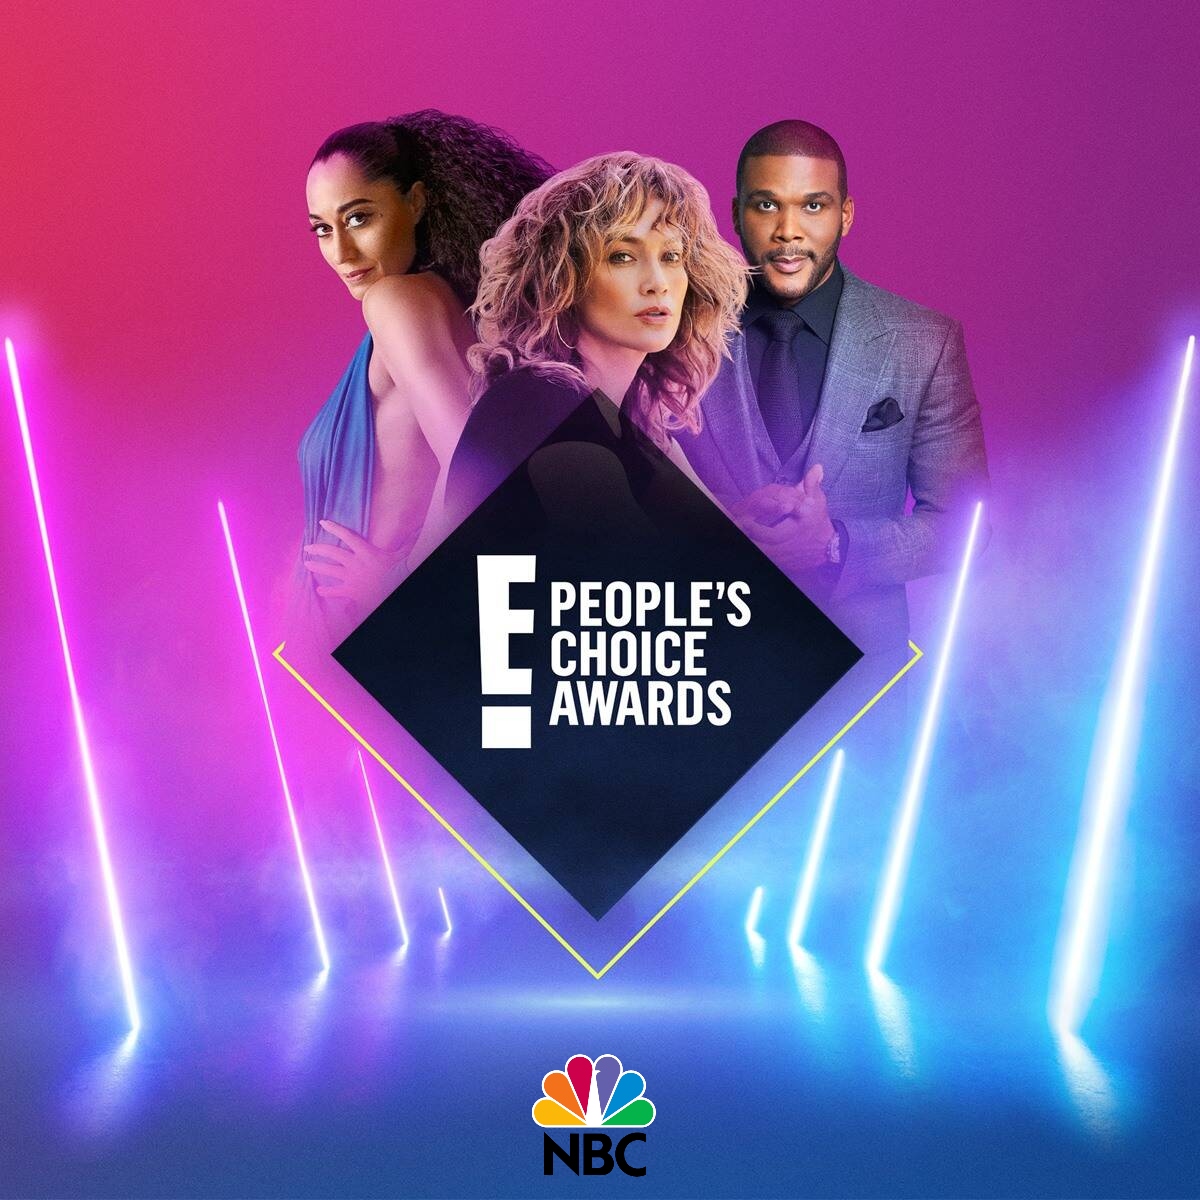 Where to watch People’s Choice Awards